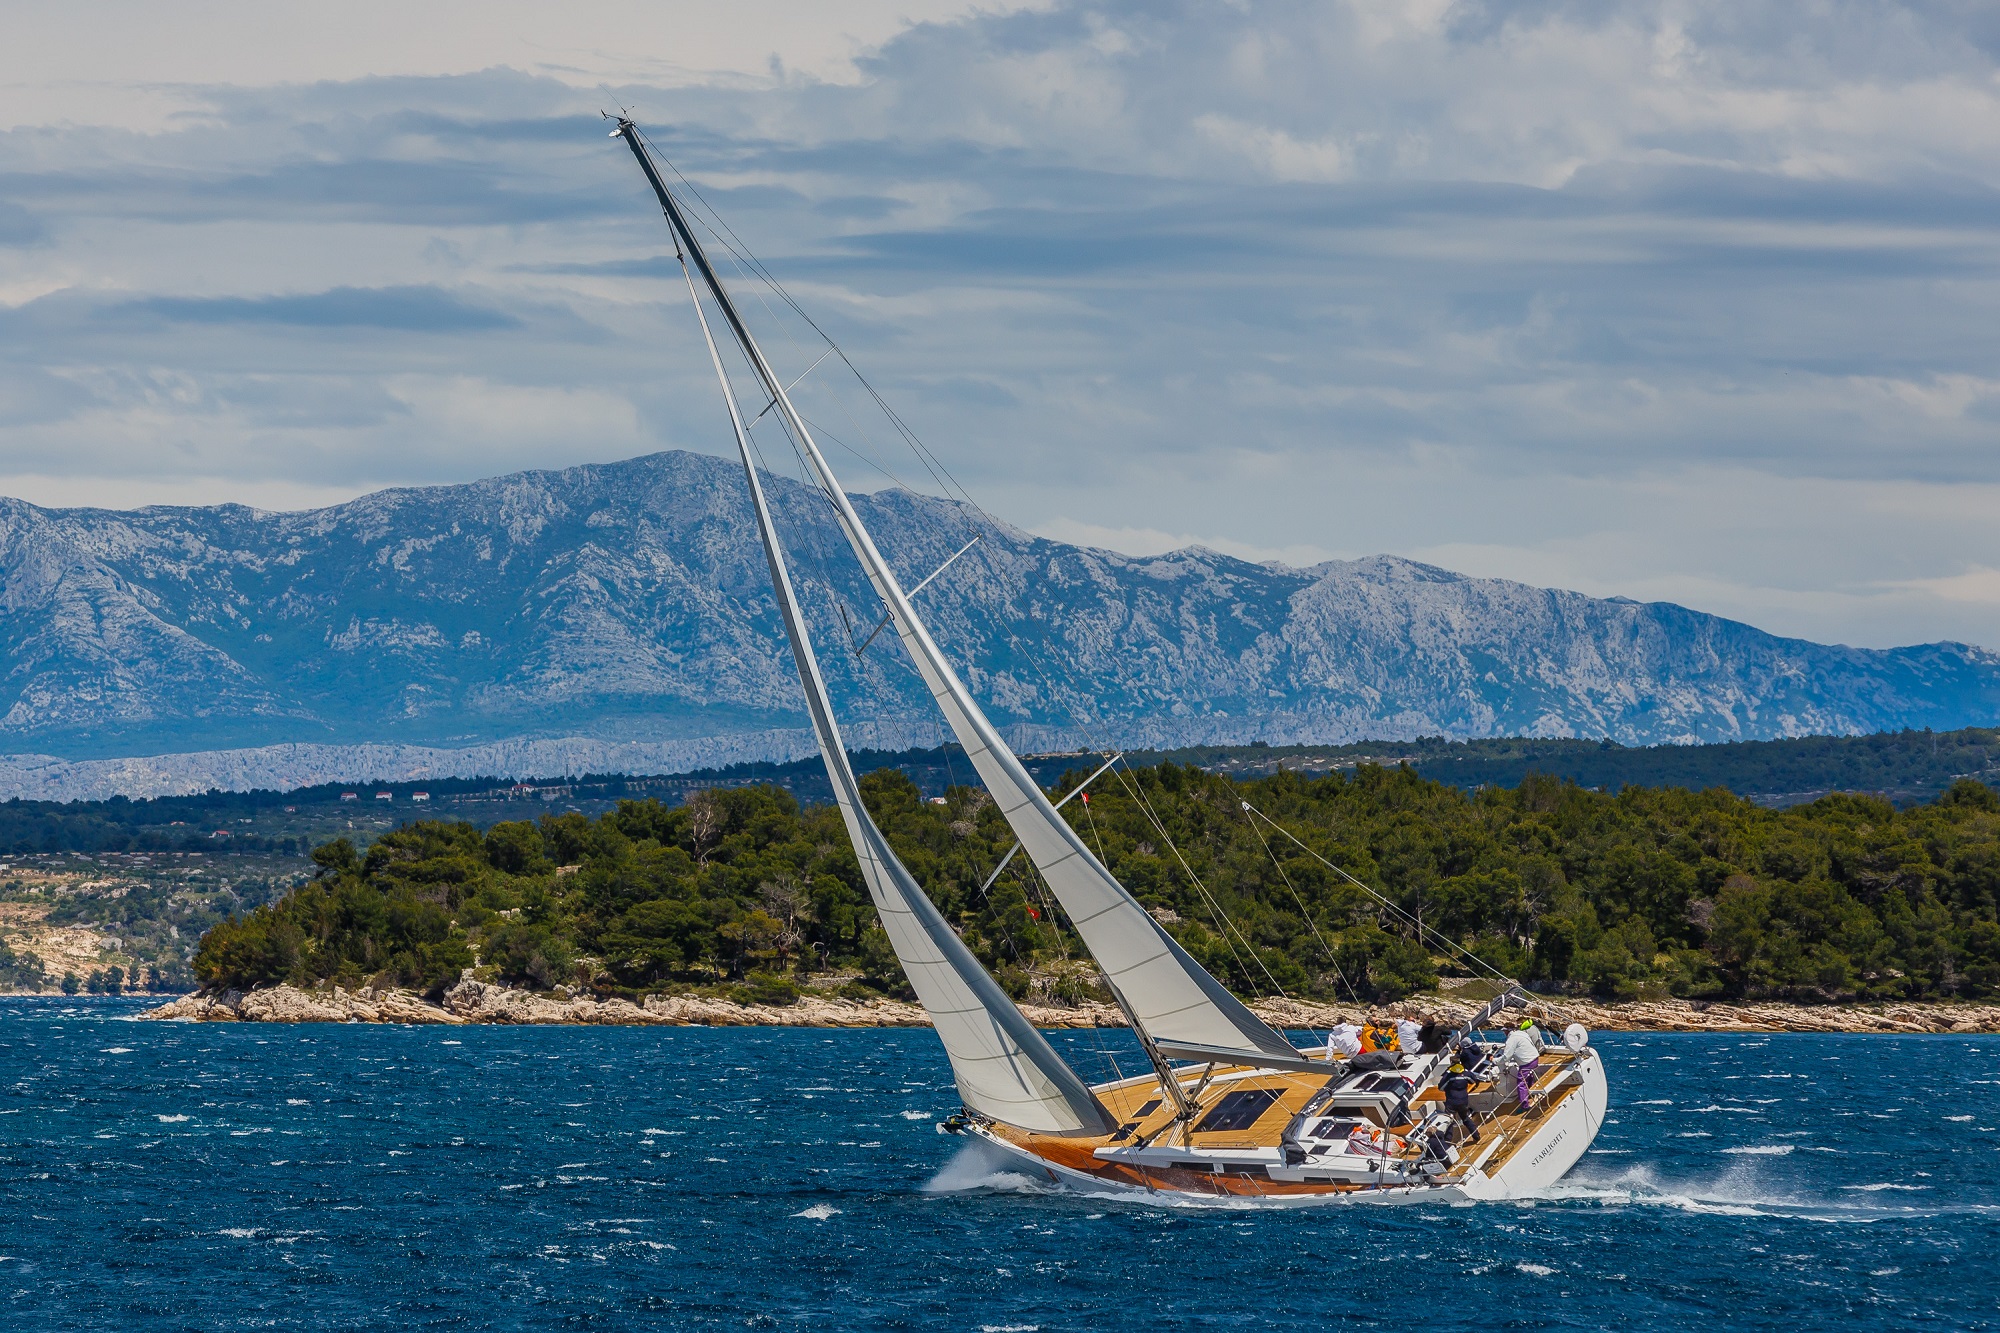 Are you ready for Hanse cup Adriatic 2023?